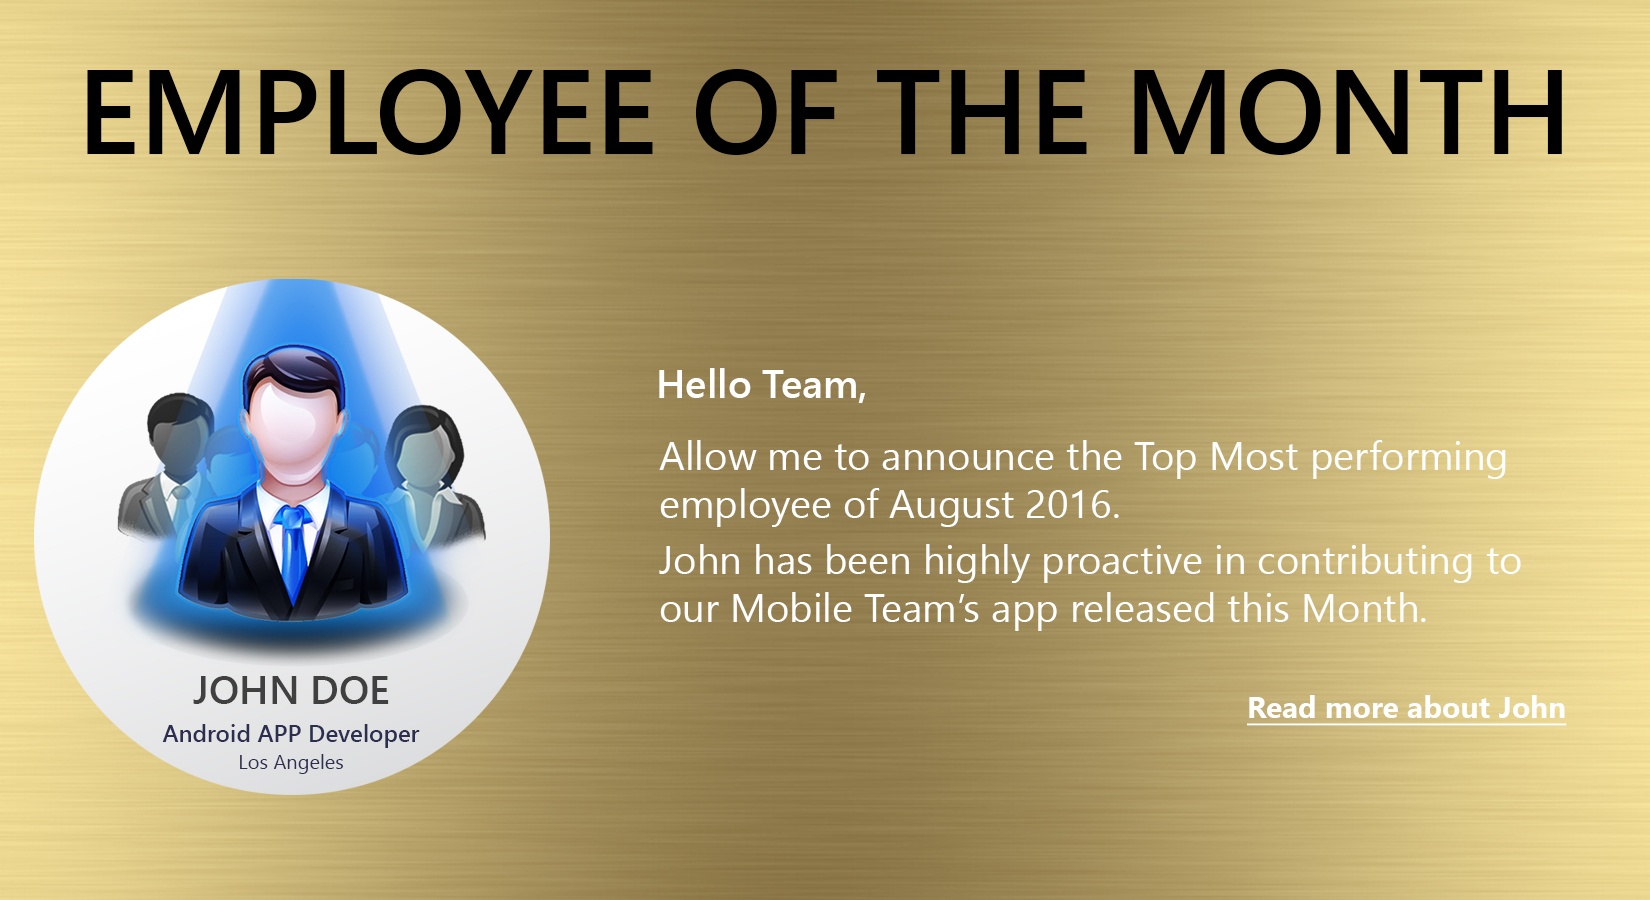 Easy to create Employee Of Month or Employee Spotlight sections